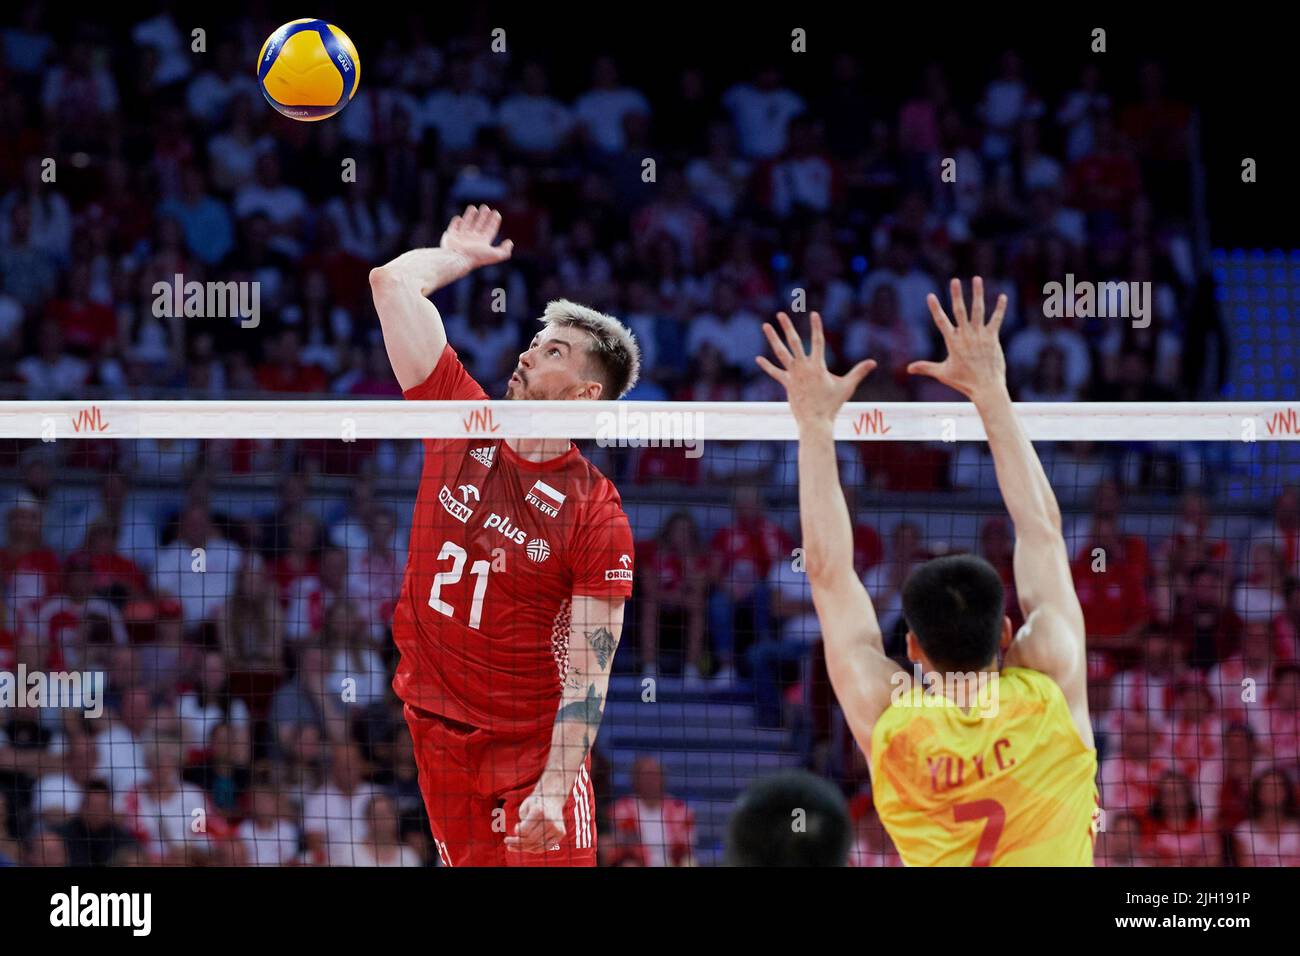 Tomasz Fornal (L) of Poland and Yu Yaochen (R) of China during the 2022 men's FIVB Volleyball Nations League match between Poland and China in Gdansk, Poland, 07 July 2022. Stock Photo